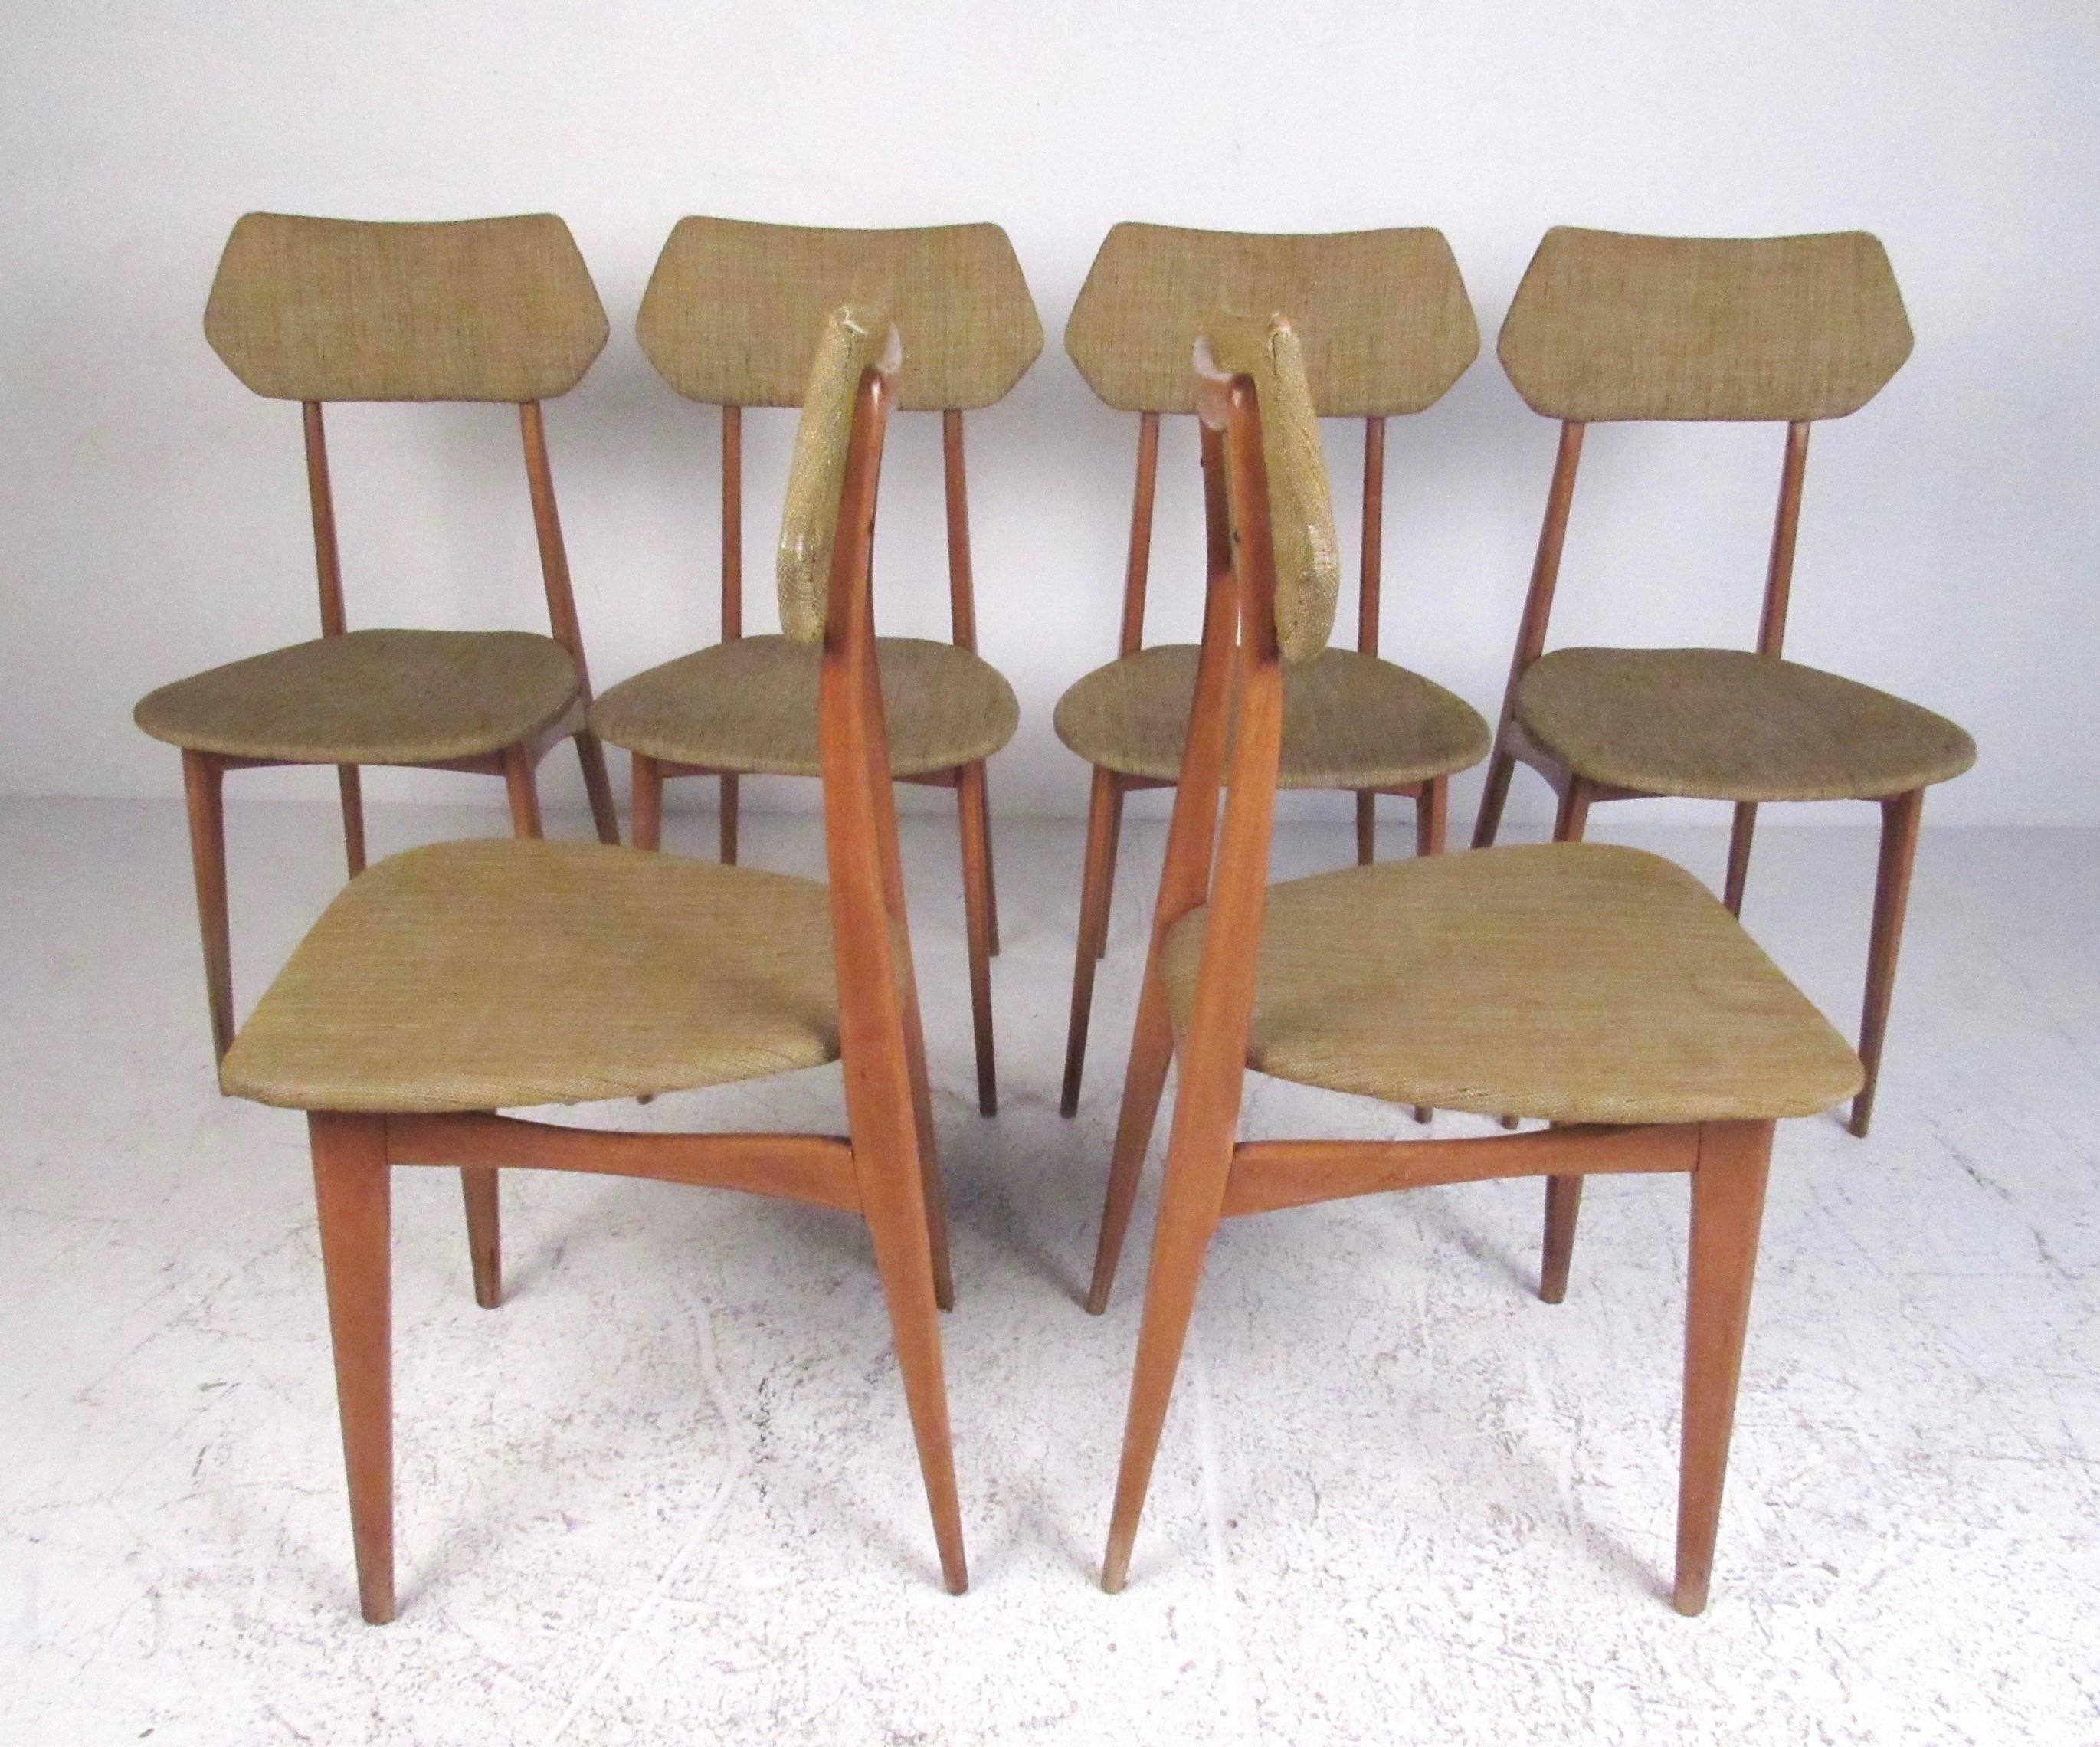 This sleek and stylish set of six vintage modern dining chairs feature sculptural Italian modern design in the style of Ico Parisi. Slender tapered legs and comfortable sculpted seats make the matching set of six an impressive addition to any dining